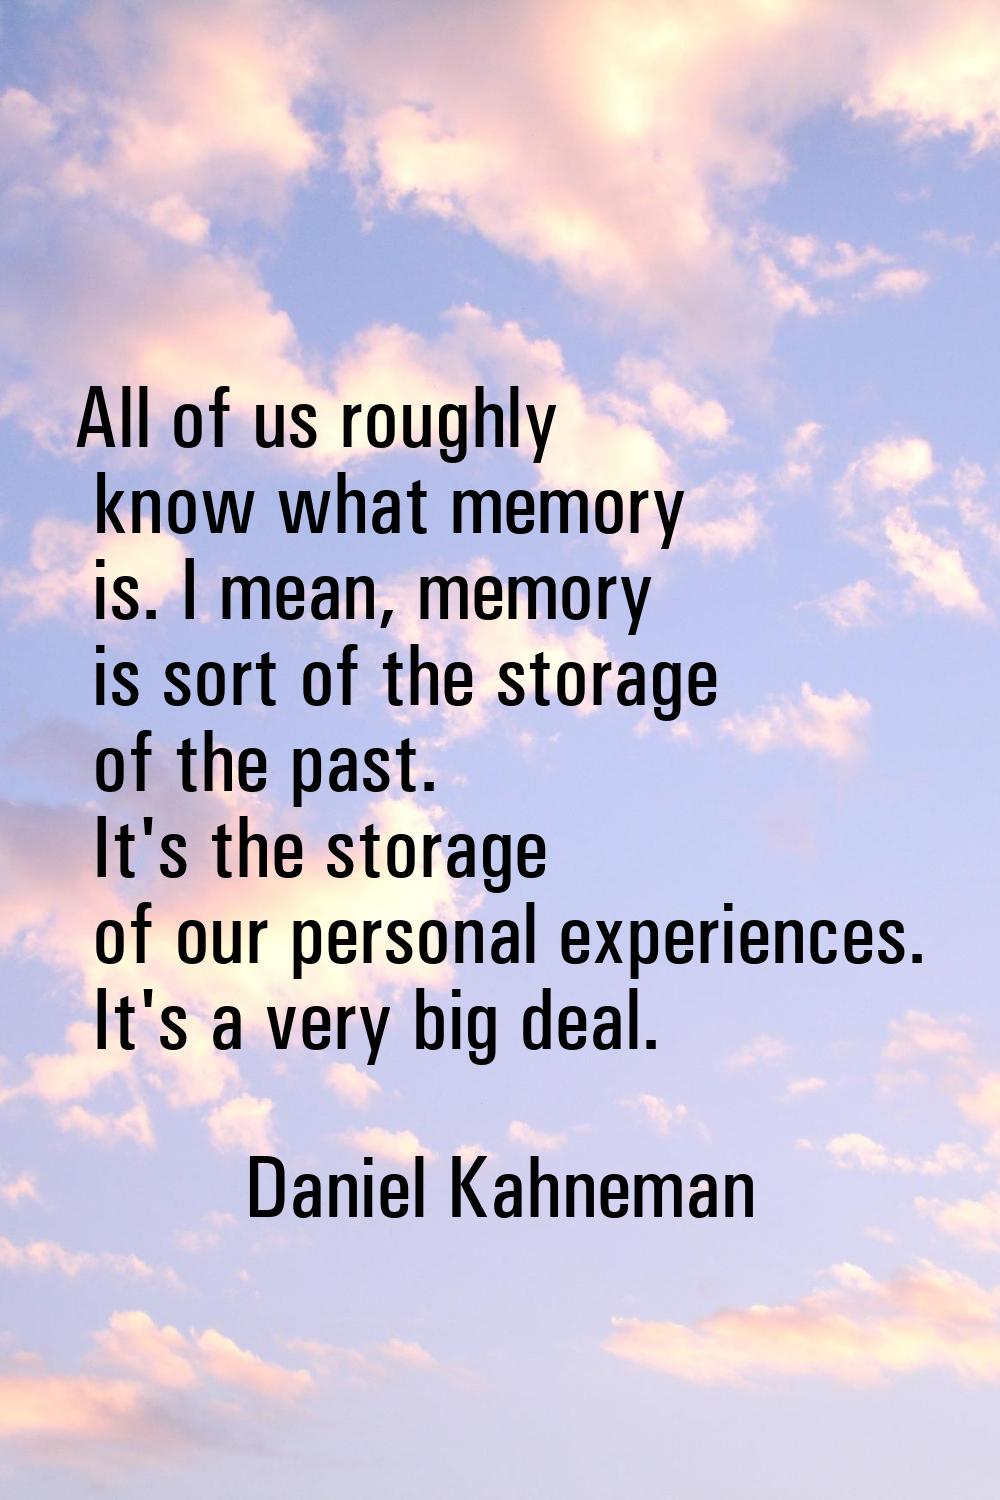 All of us roughly know what memory is. I mean, memory is sort of the storage of the past. It's the 